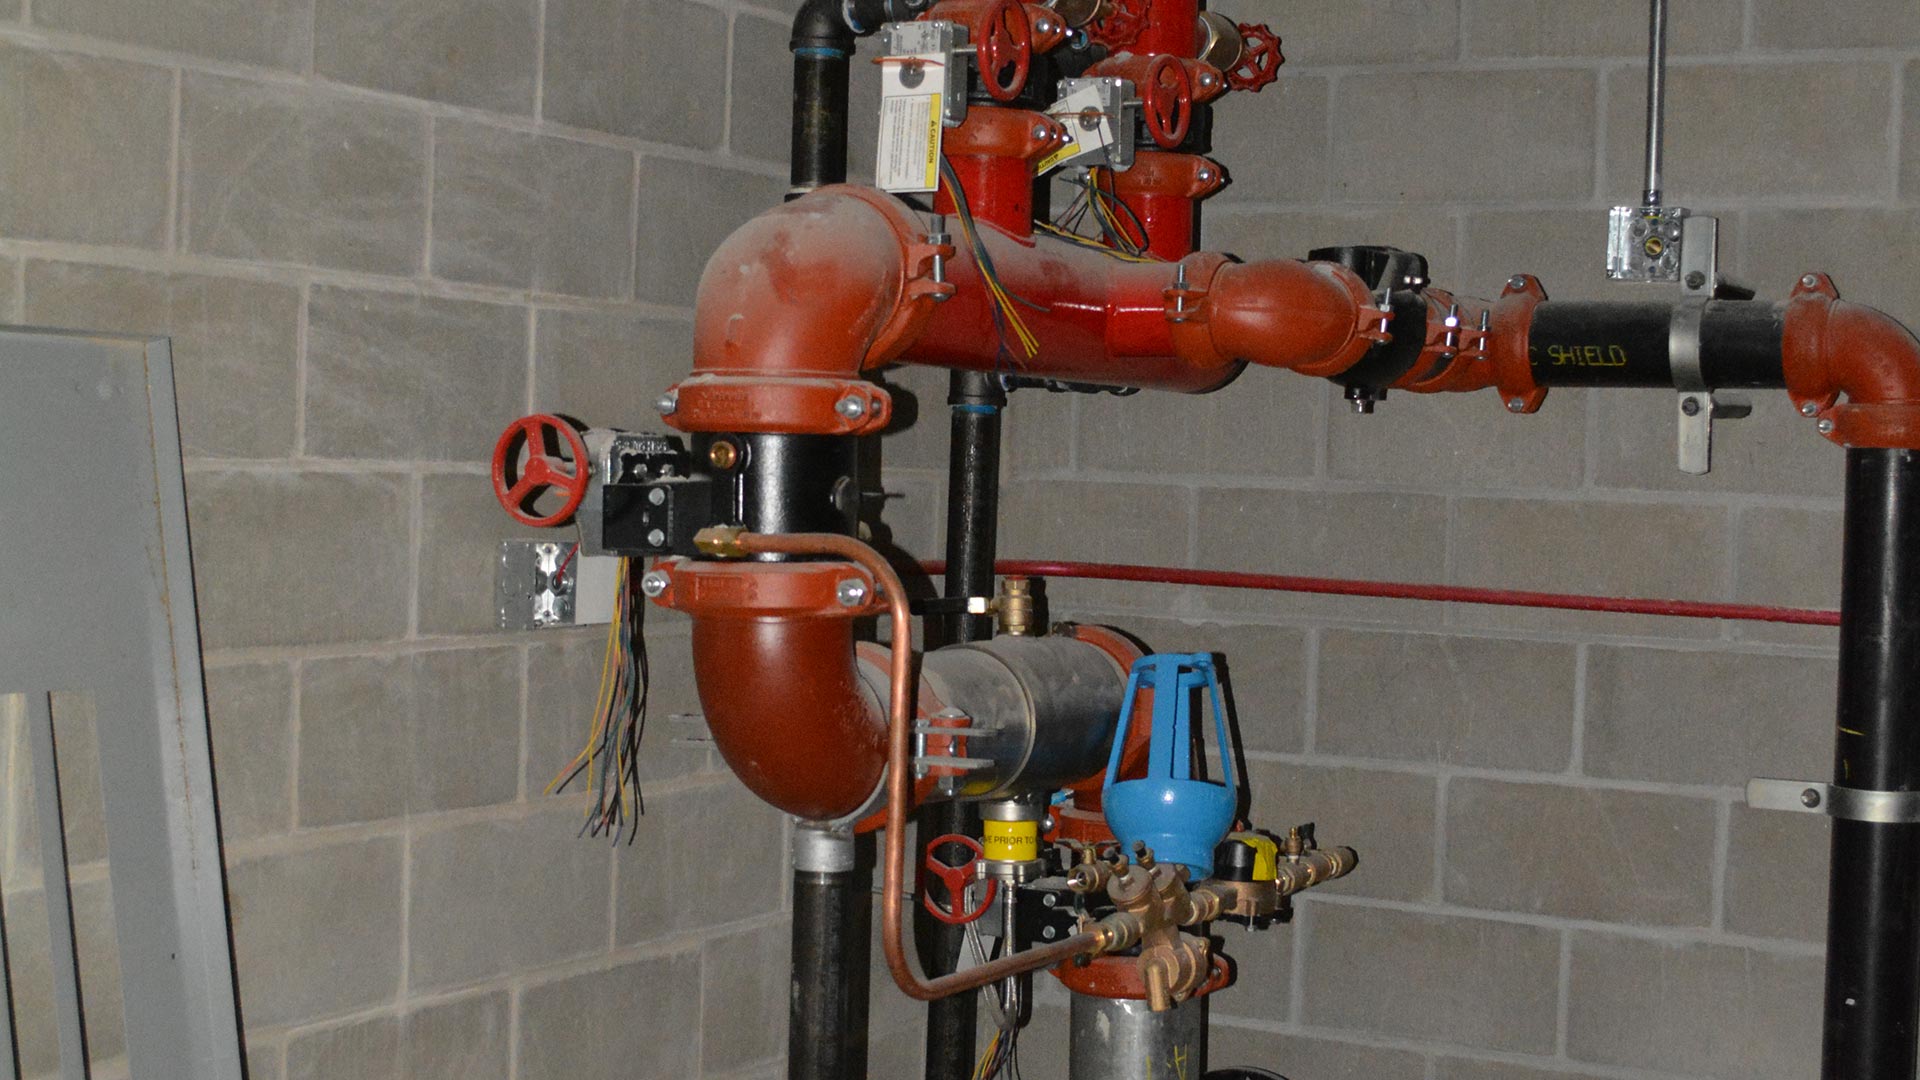 Hometown Plumbing and Heating Quad Cities Iowa Projects Fillmore Elementary School piping